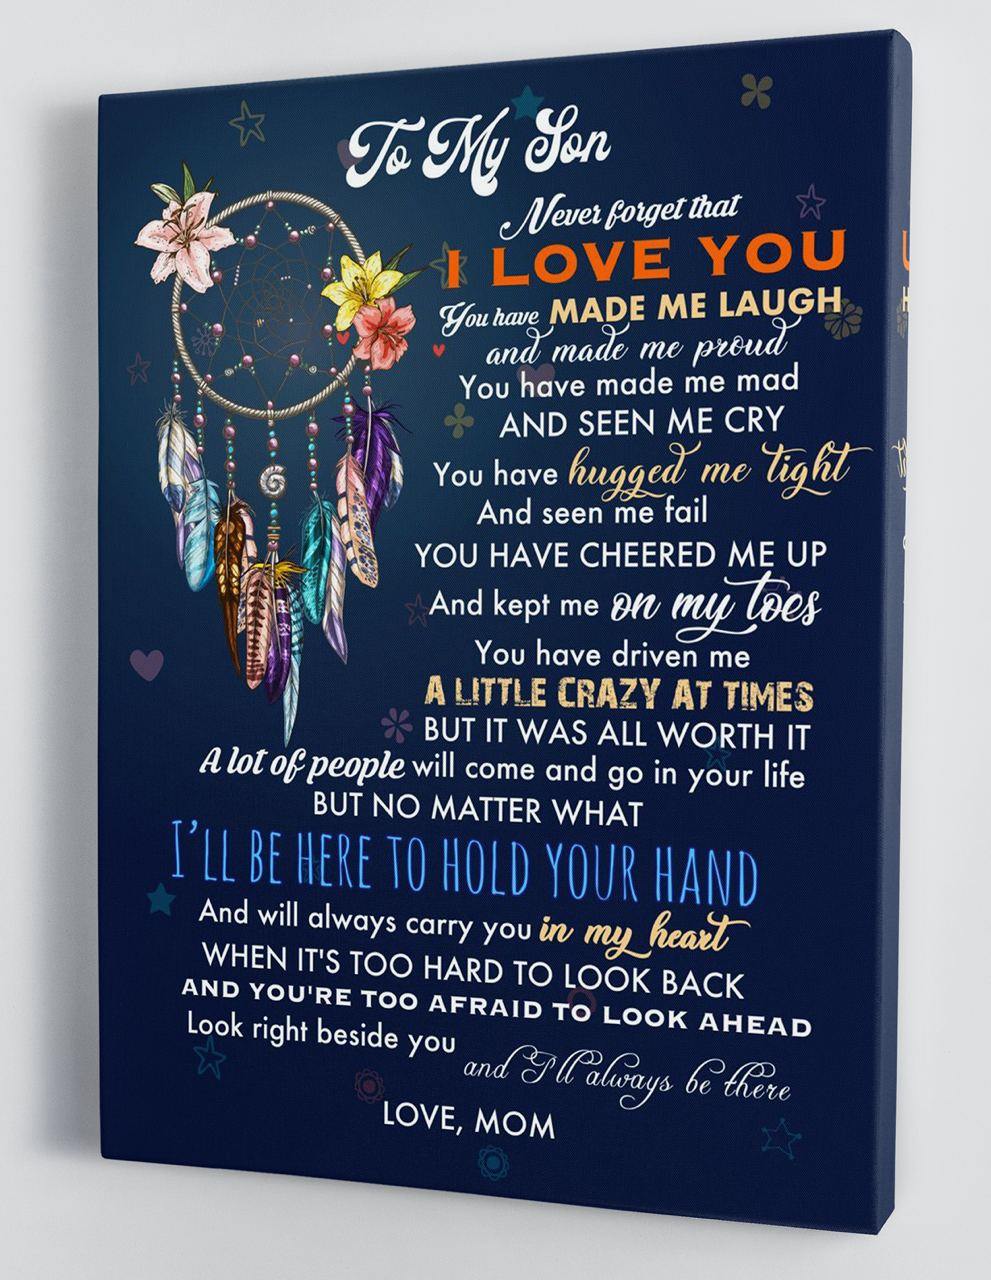 To My Son - From Mom - Hard Time Framed Canvas Gift MS056 - DivesArt LLC